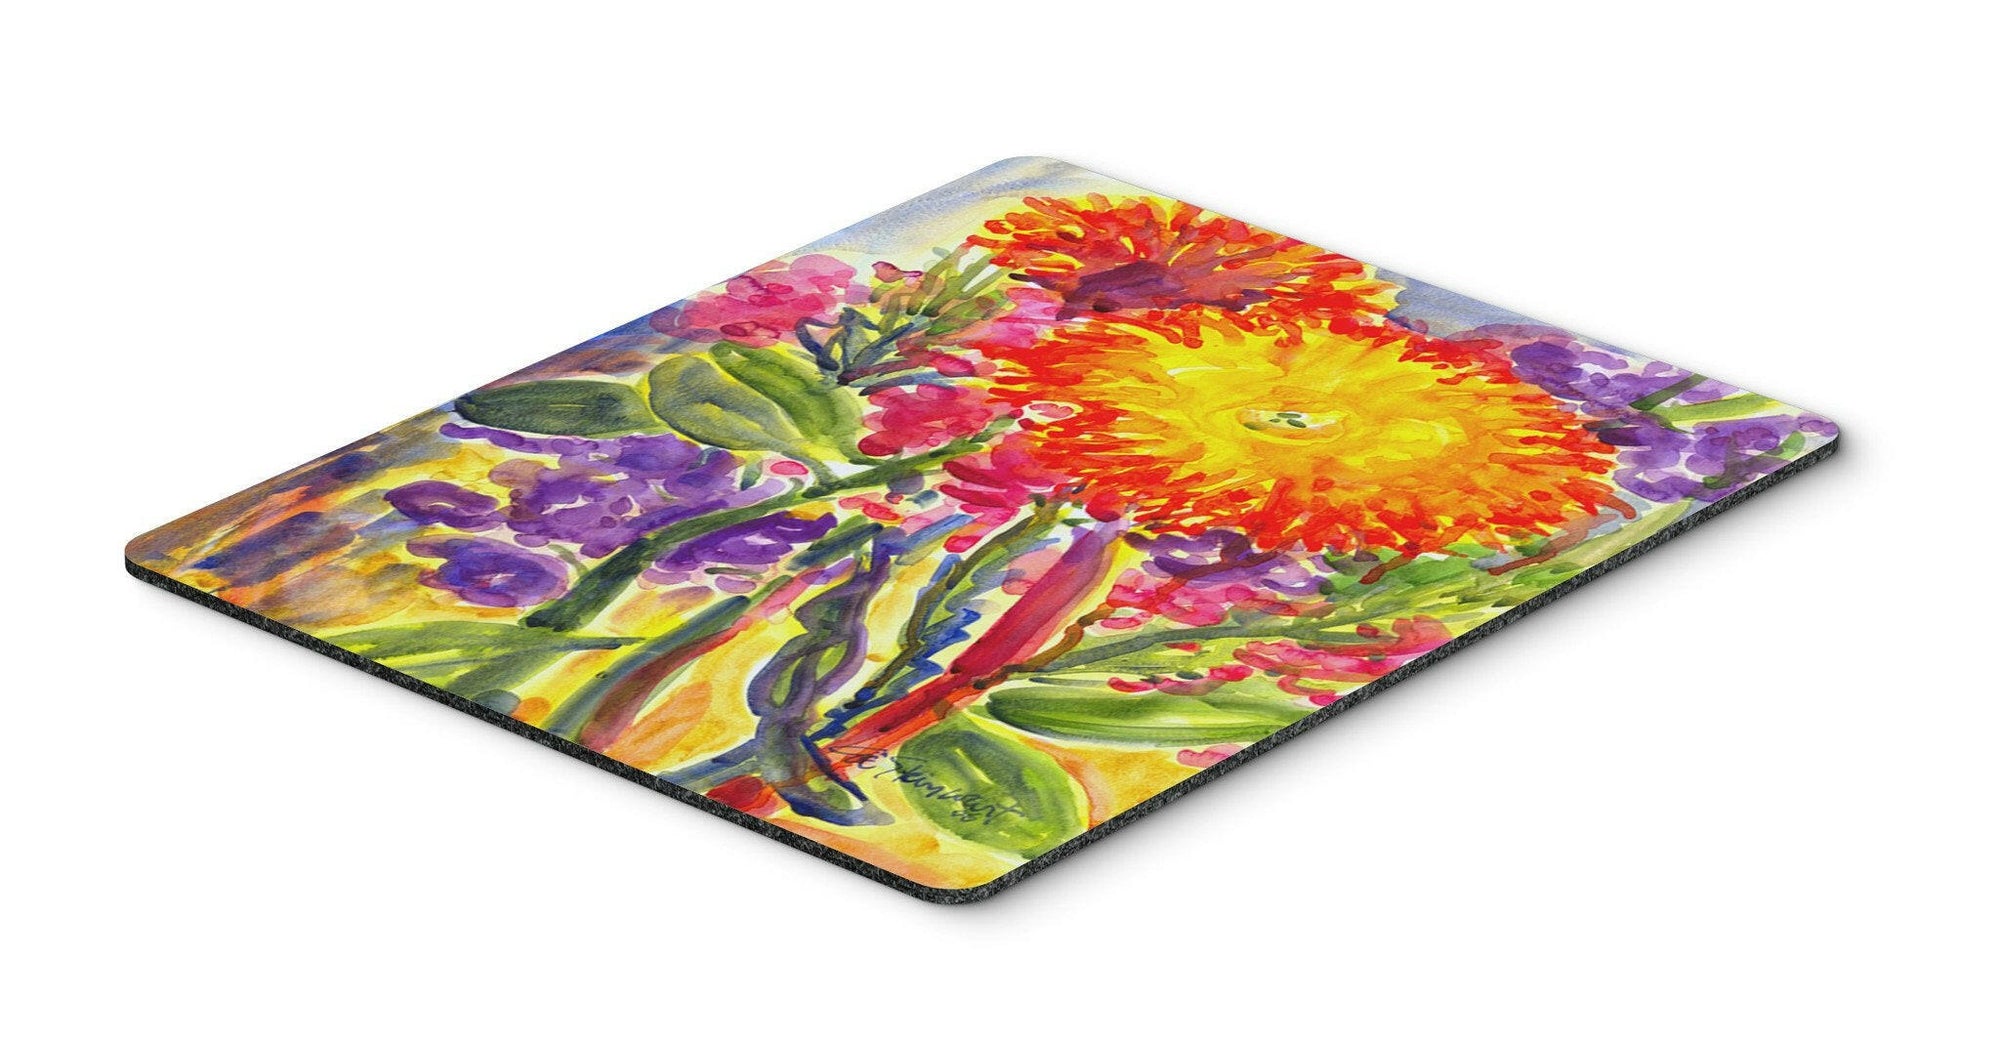 Flower - Aster Mouse Pad, Hot Pad or Trivet by Caroline's Treasures